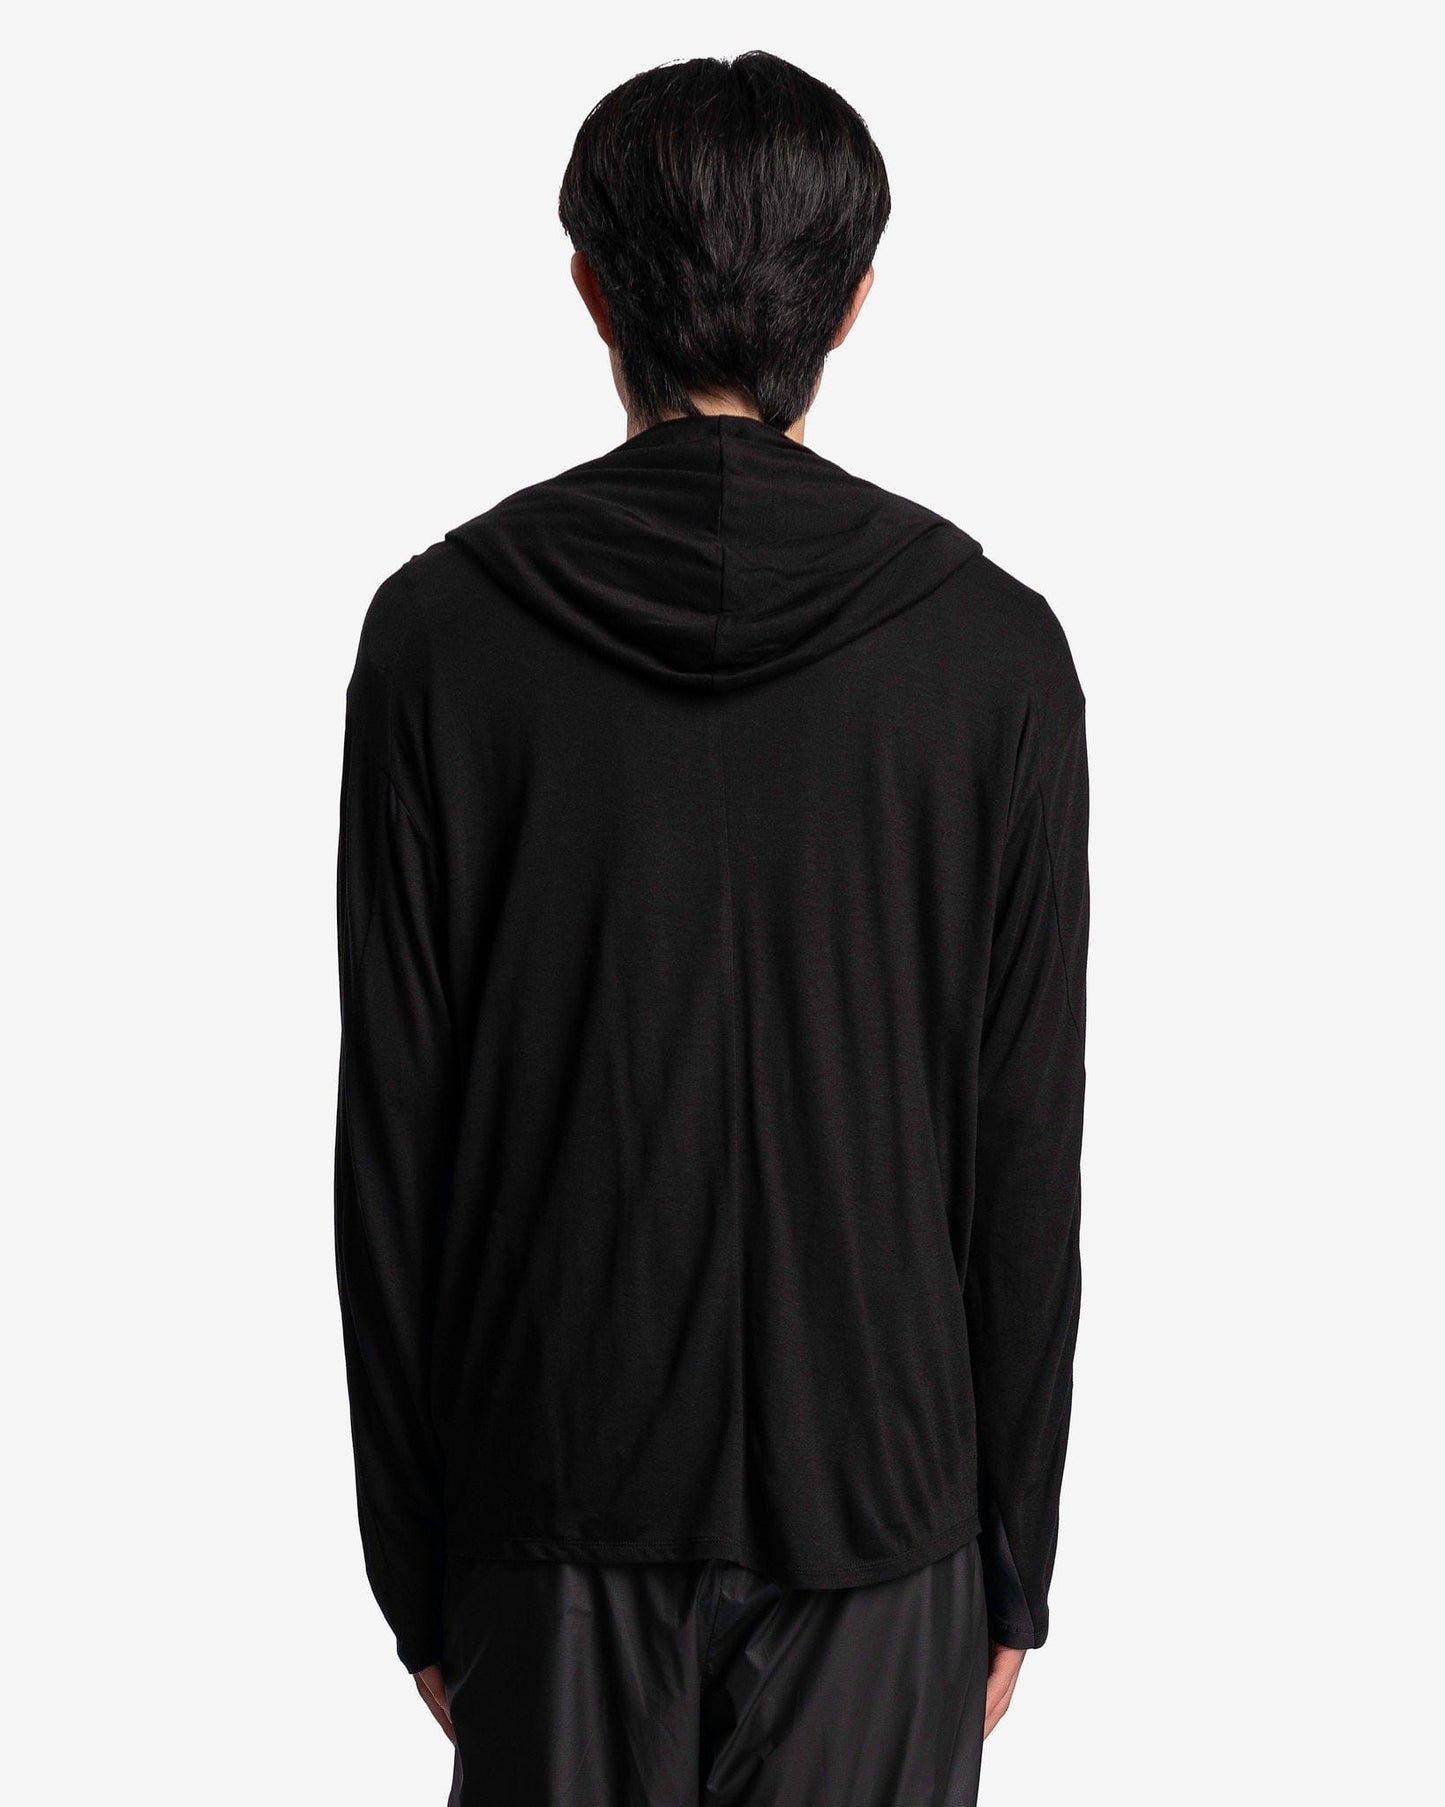 POST ARCHIVE FACTION (P.A.F) Men's Sweatshirts 5.0+ Hoodie Right in Black